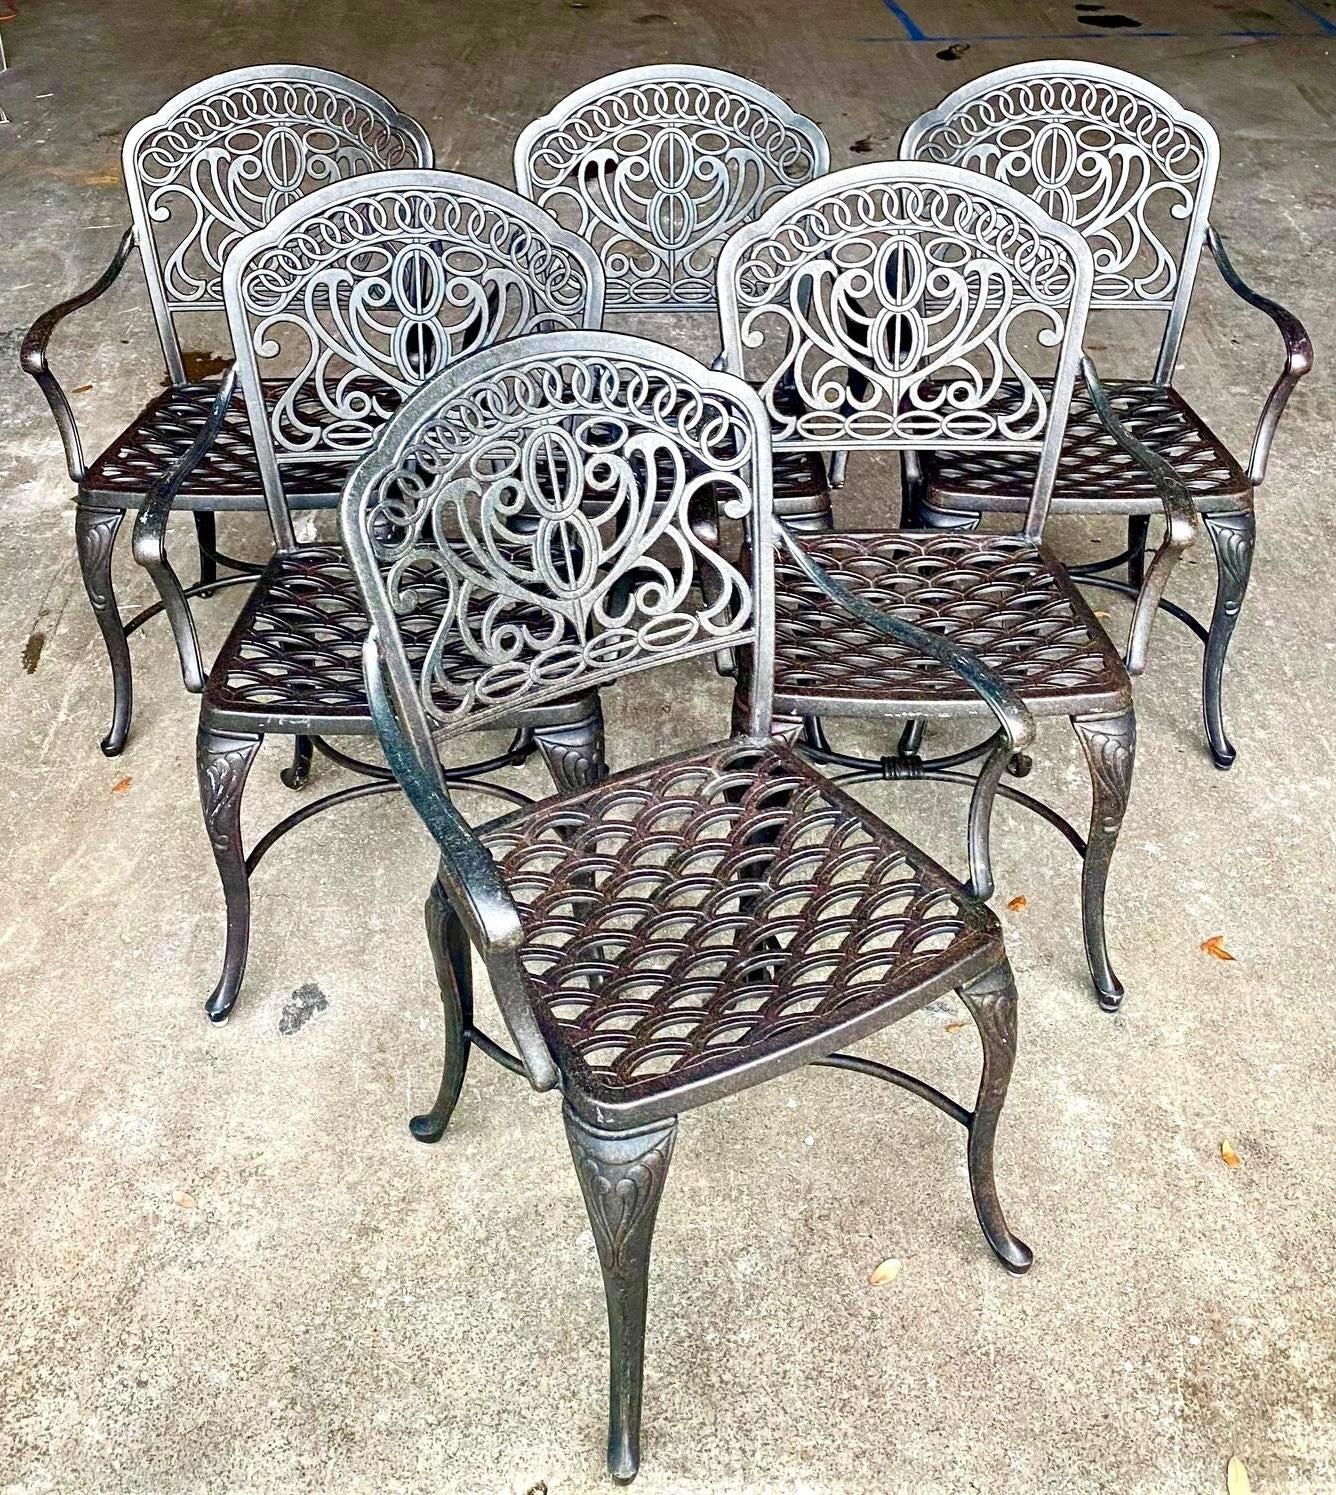 Vintage Coastal Hanamint Cast Aluminum Outdoor Dining Chairs - Set of 6 For Sale 3